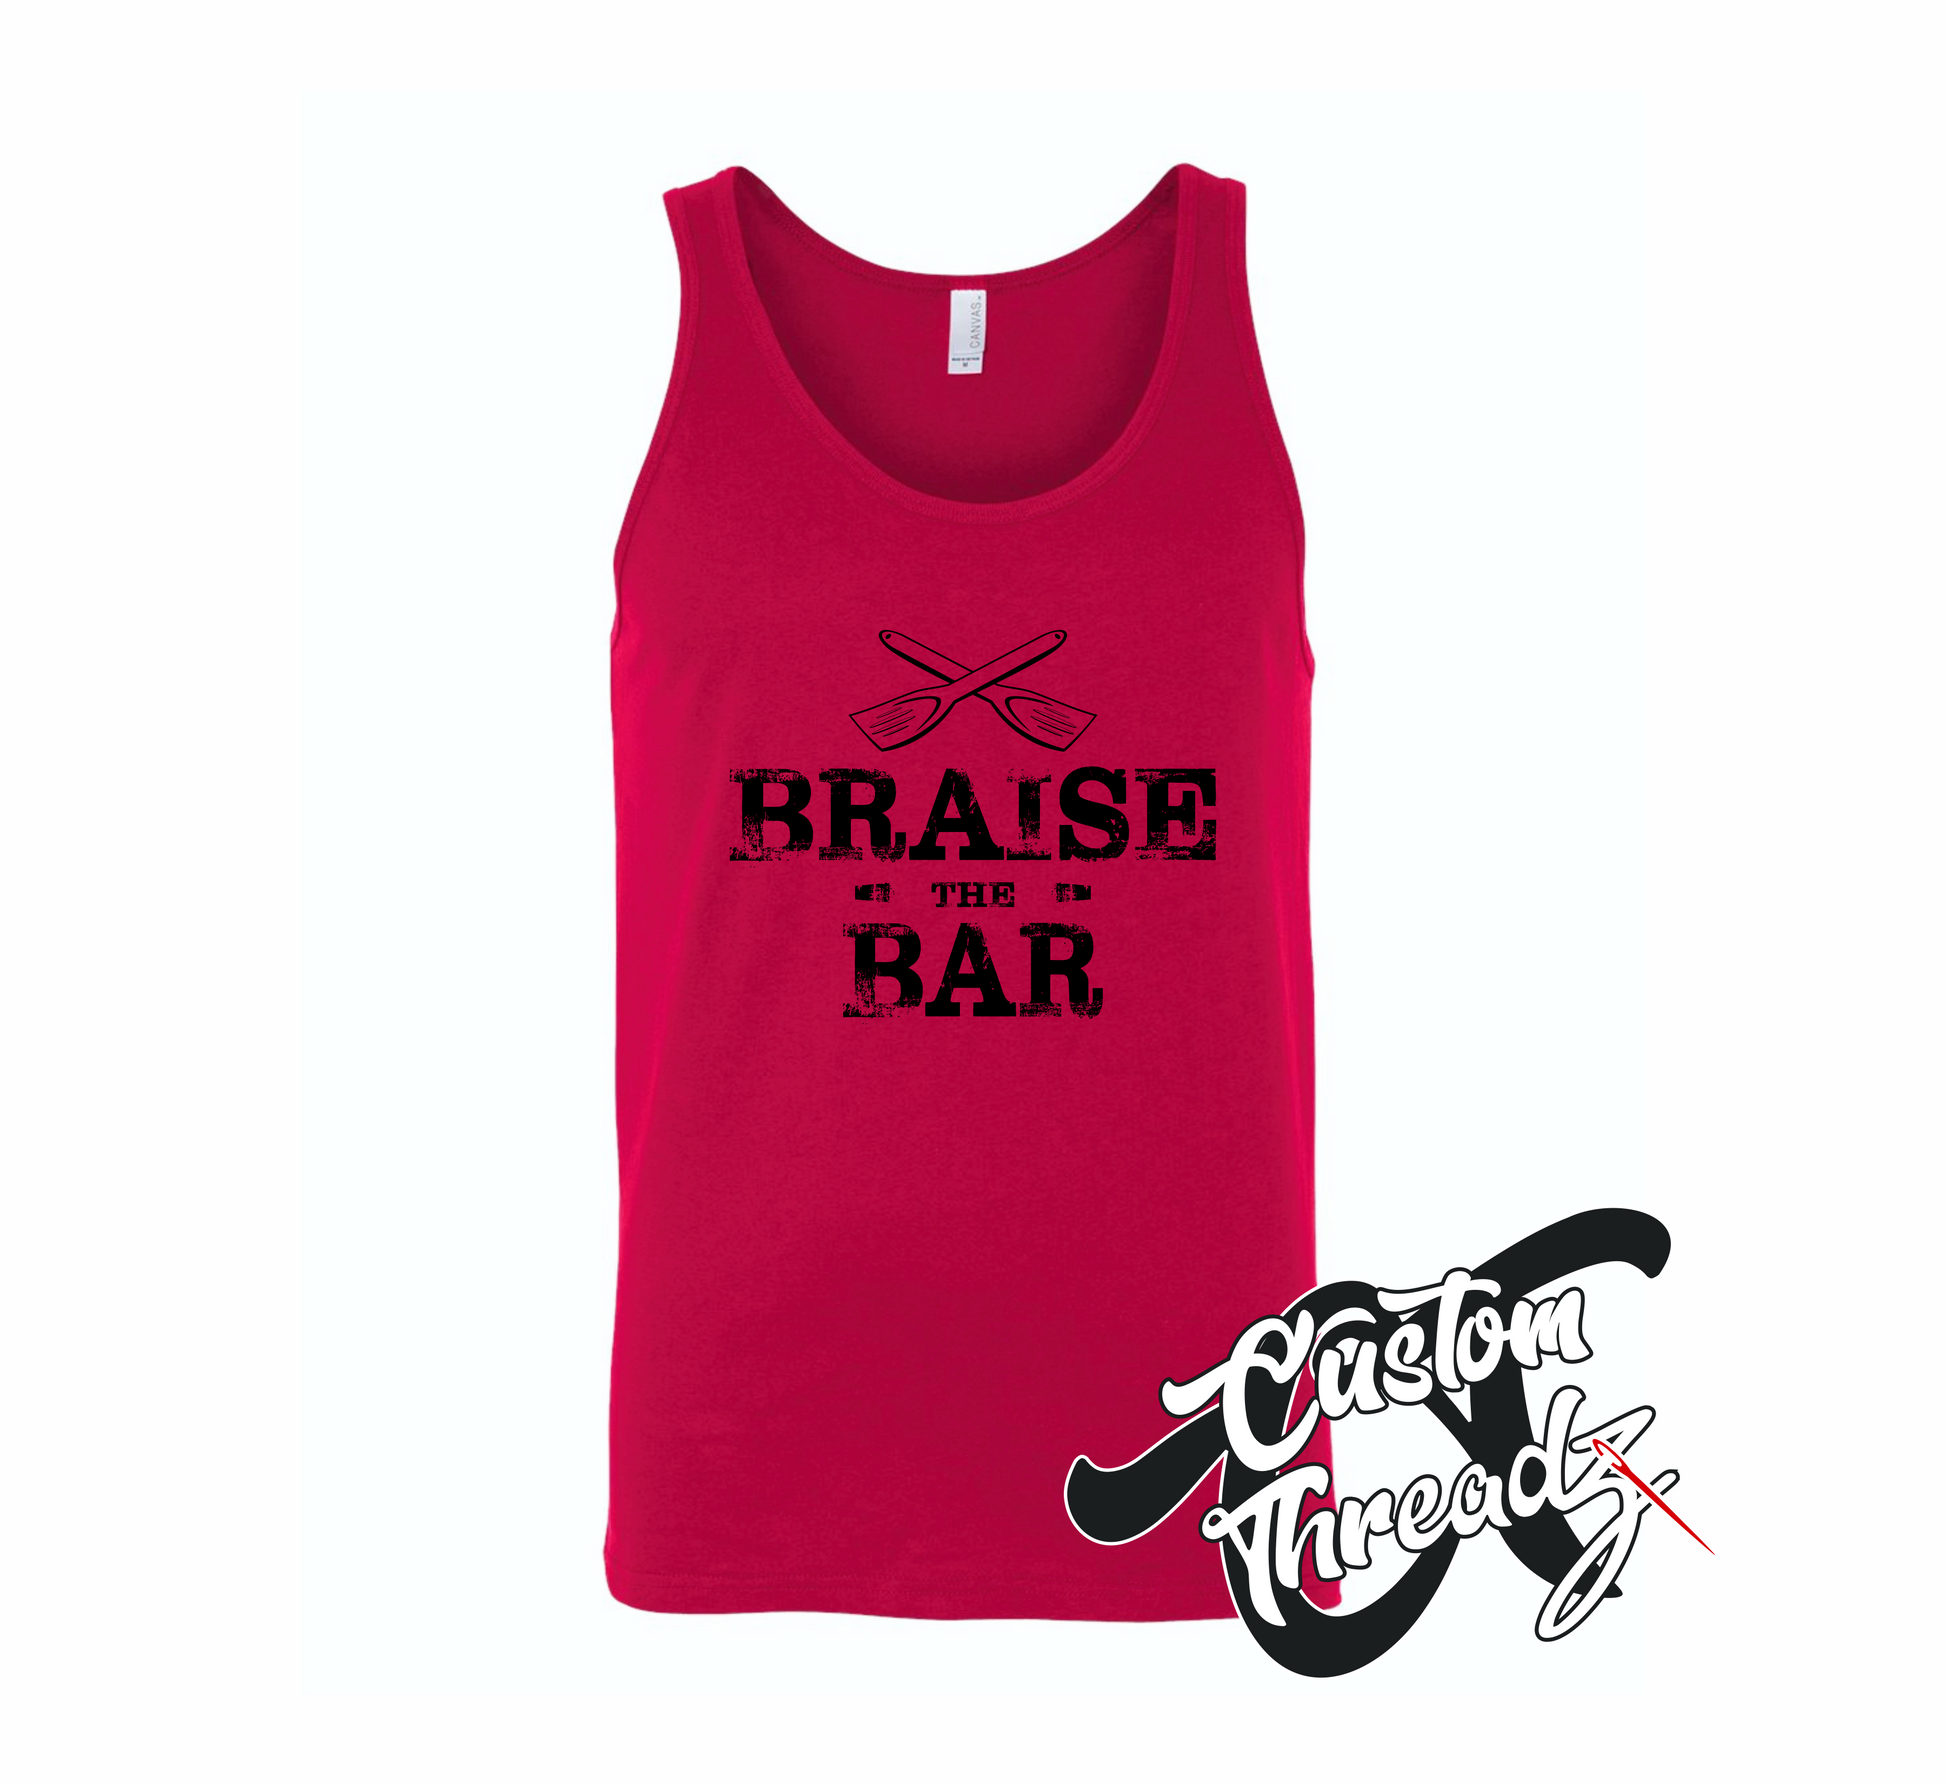 red tank top with braise the bar DTG printed design